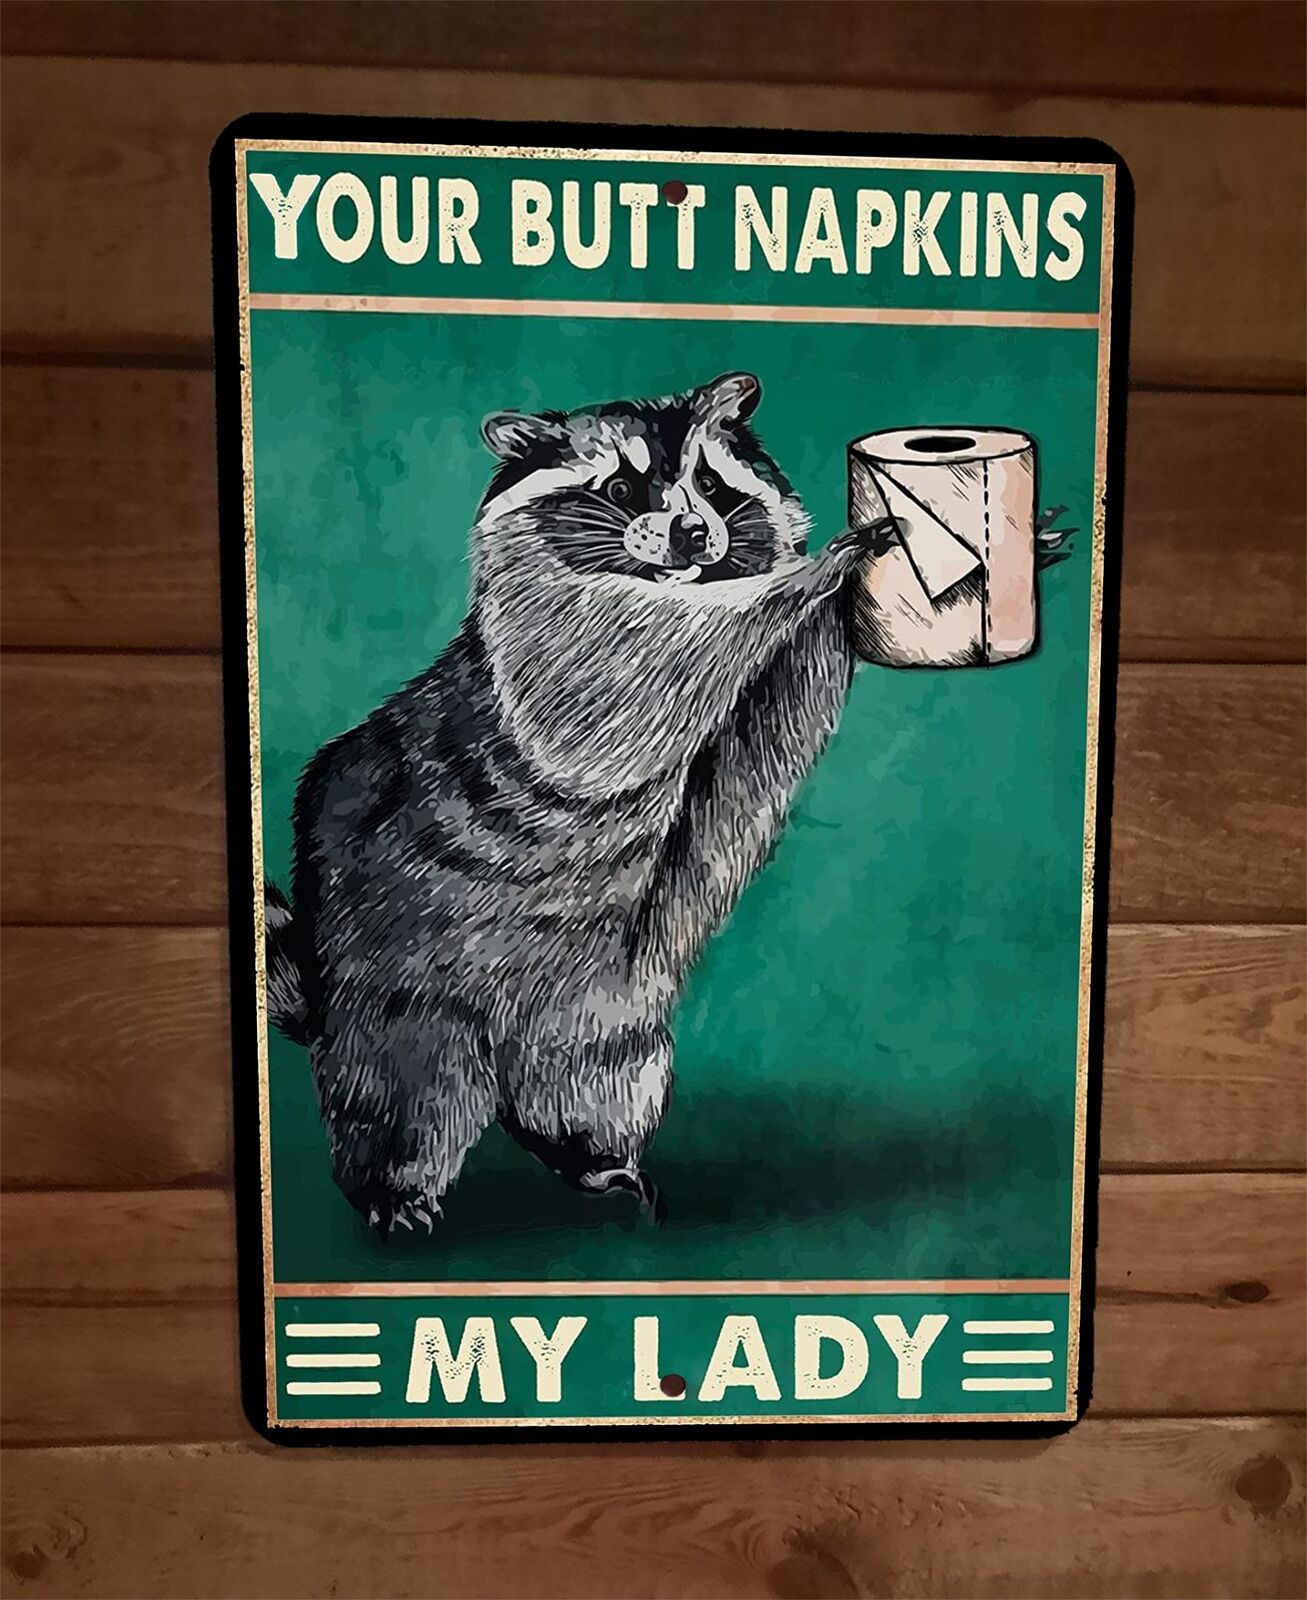 Your Butt Napkins My Lady Raccoon 8x12 Metal Wall Sign Animal Poster